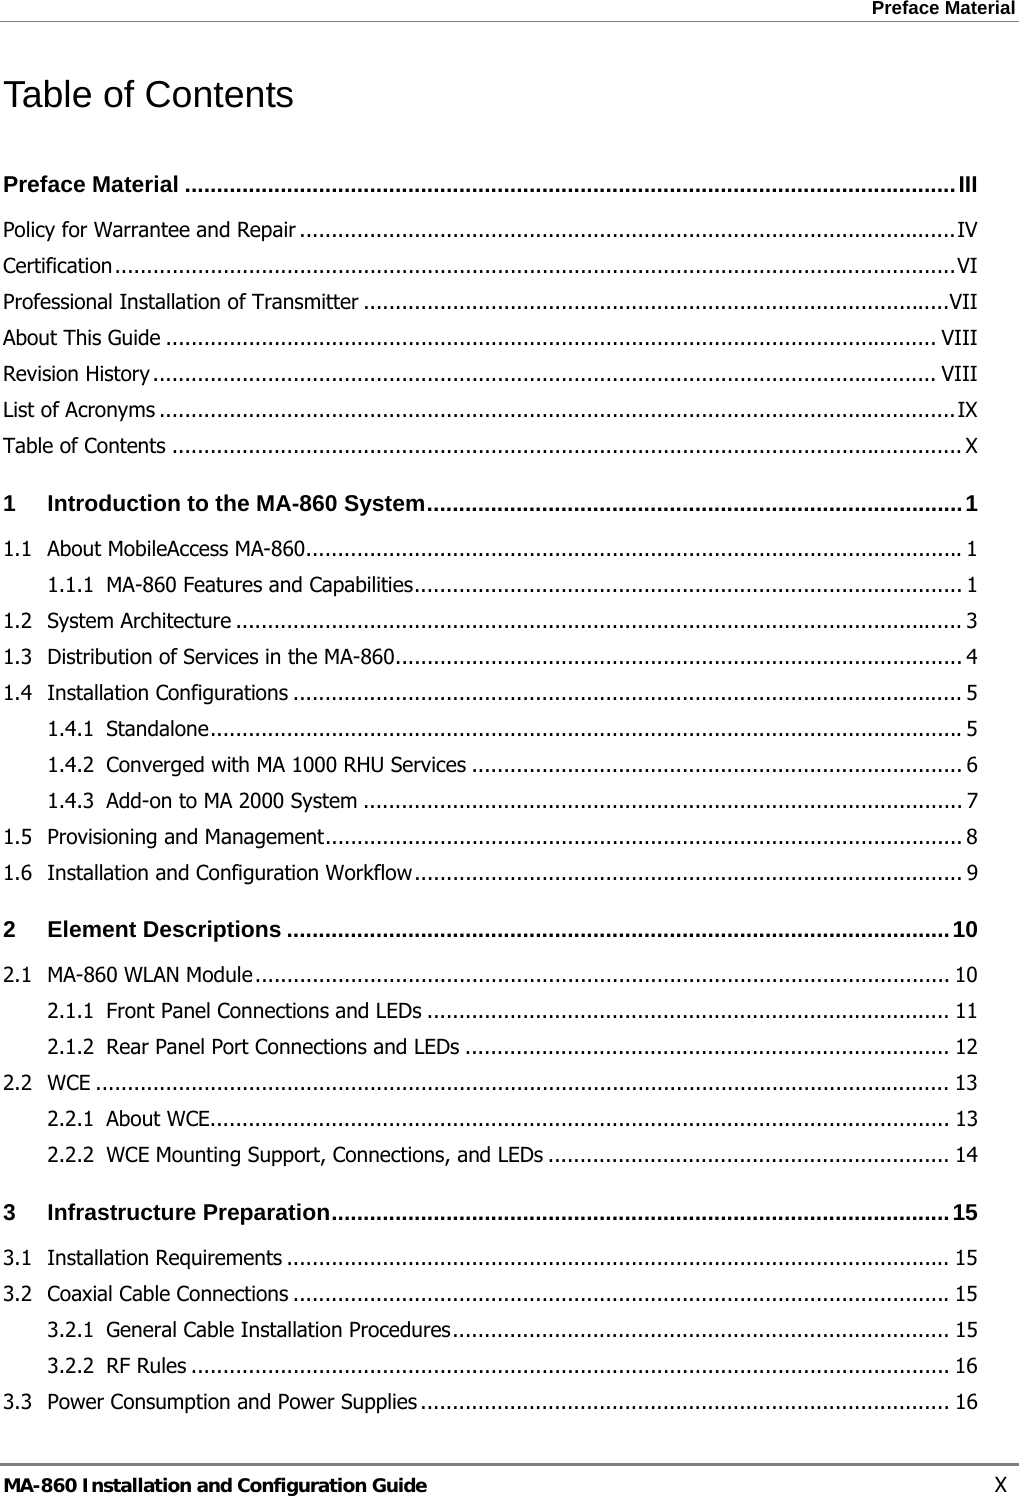 Preface Material  Table of Contents Preface Material .........................................................................................................................III Policy for Warrantee and Repair .......................................................................................................IV Certification....................................................................................................................................VI Professional Installation of Transmitter ............................................................................................VII About This Guide ......................................................................................................................... VIII Revision History ........................................................................................................................... VIII List of Acronyms .............................................................................................................................IX Table of Contents ............................................................................................................................ X 1 Introduction to the MA-860 System....................................................................................1 1.1 About MobileAccess MA-860.......................................................................................................1 1.1.1 MA-860 Features and Capabilities...................................................................................... 1 1.2 System Architecture .................................................................................................................. 3 1.3 Distribution of Services in the MA-860......................................................................................... 4 1.4 Installation Configurations ......................................................................................................... 5 1.4.1 Standalone......................................................................................................................5 1.4.2 Converged with MA 1000 RHU Services ............................................................................. 6 1.4.3 Add-on to MA 2000 System .............................................................................................. 7 1.5 Provisioning and Management.................................................................................................... 8 1.6 Installation and Configuration Workflow...................................................................................... 9 2 Element Descriptions ........................................................................................................10 2.1 MA-860 WLAN Module............................................................................................................. 10 2.1.1 Front Panel Connections and LEDs .................................................................................. 11 2.1.2 Rear Panel Port Connections and LEDs ............................................................................ 12 2.2 WCE ...................................................................................................................................... 13 2.2.1 About WCE.................................................................................................................... 13 2.2.2 WCE Mounting Support, Connections, and LEDs ............................................................... 14 3 Infrastructure Preparation.................................................................................................15 3.1 Installation Requirements ........................................................................................................ 15 3.2 Coaxial Cable Connections .......................................................................................................15 3.2.1 General Cable Installation Procedures.............................................................................. 15 3.2.2 RF Rules ....................................................................................................................... 16 3.3 Power Consumption and Power Supplies ................................................................................... 16 MA-860 Installation and Configuration Guide    X 